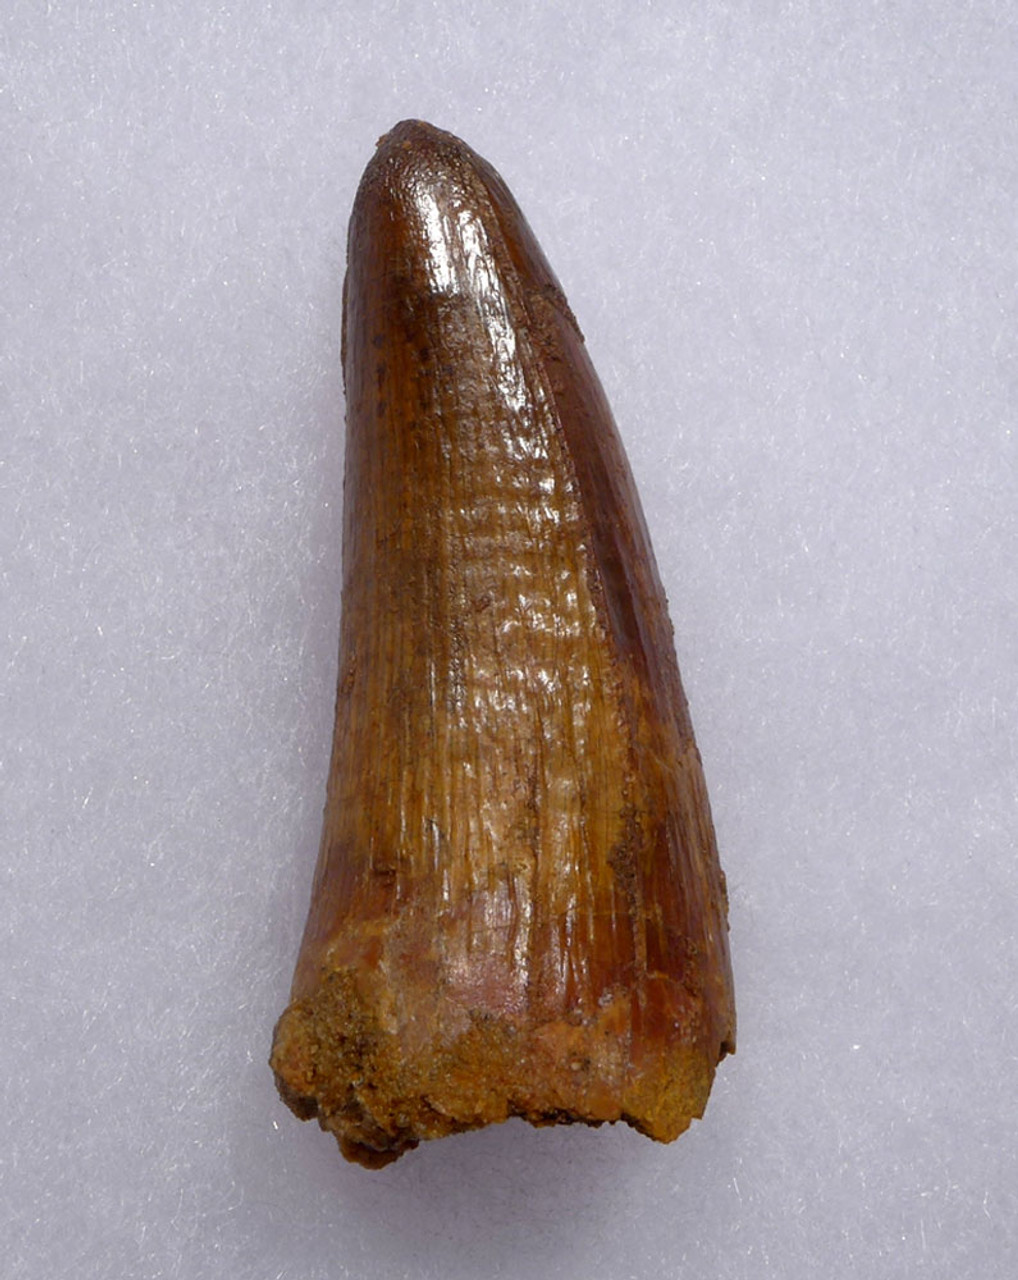 EXCEPTIONALLY LARGE CROCODILE FOSSIL FANG TOOTH FROM THE CRETACEOUS  *CROC088